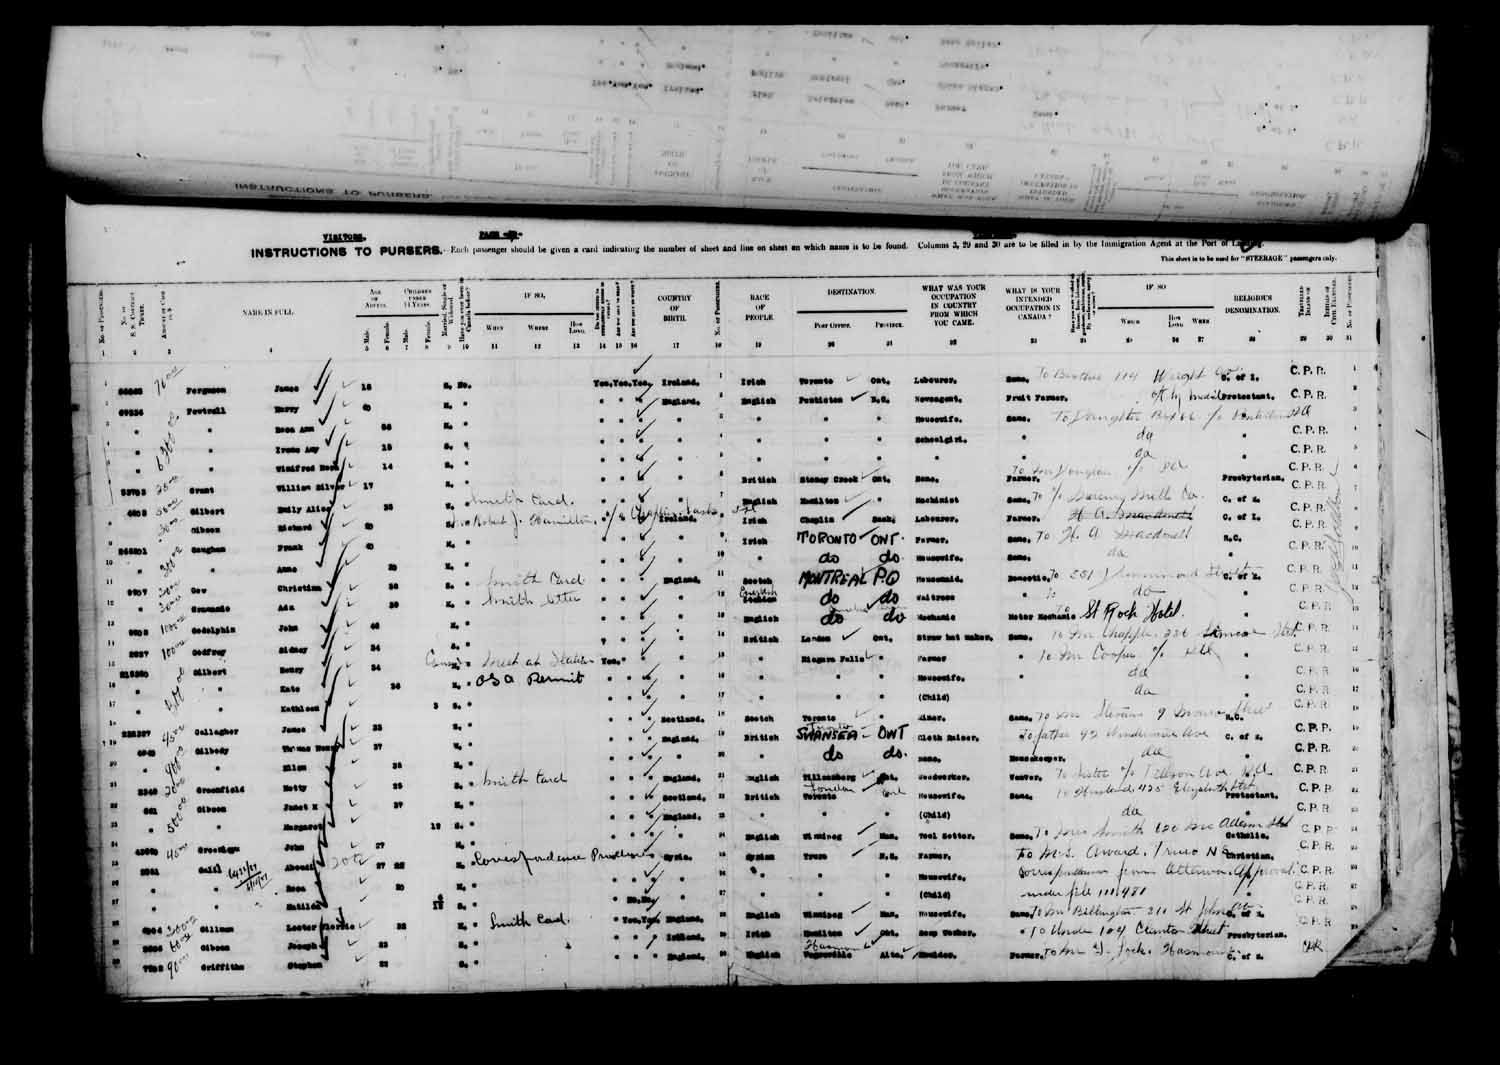 Digitized page of Passenger Lists for Image No.: e003610649